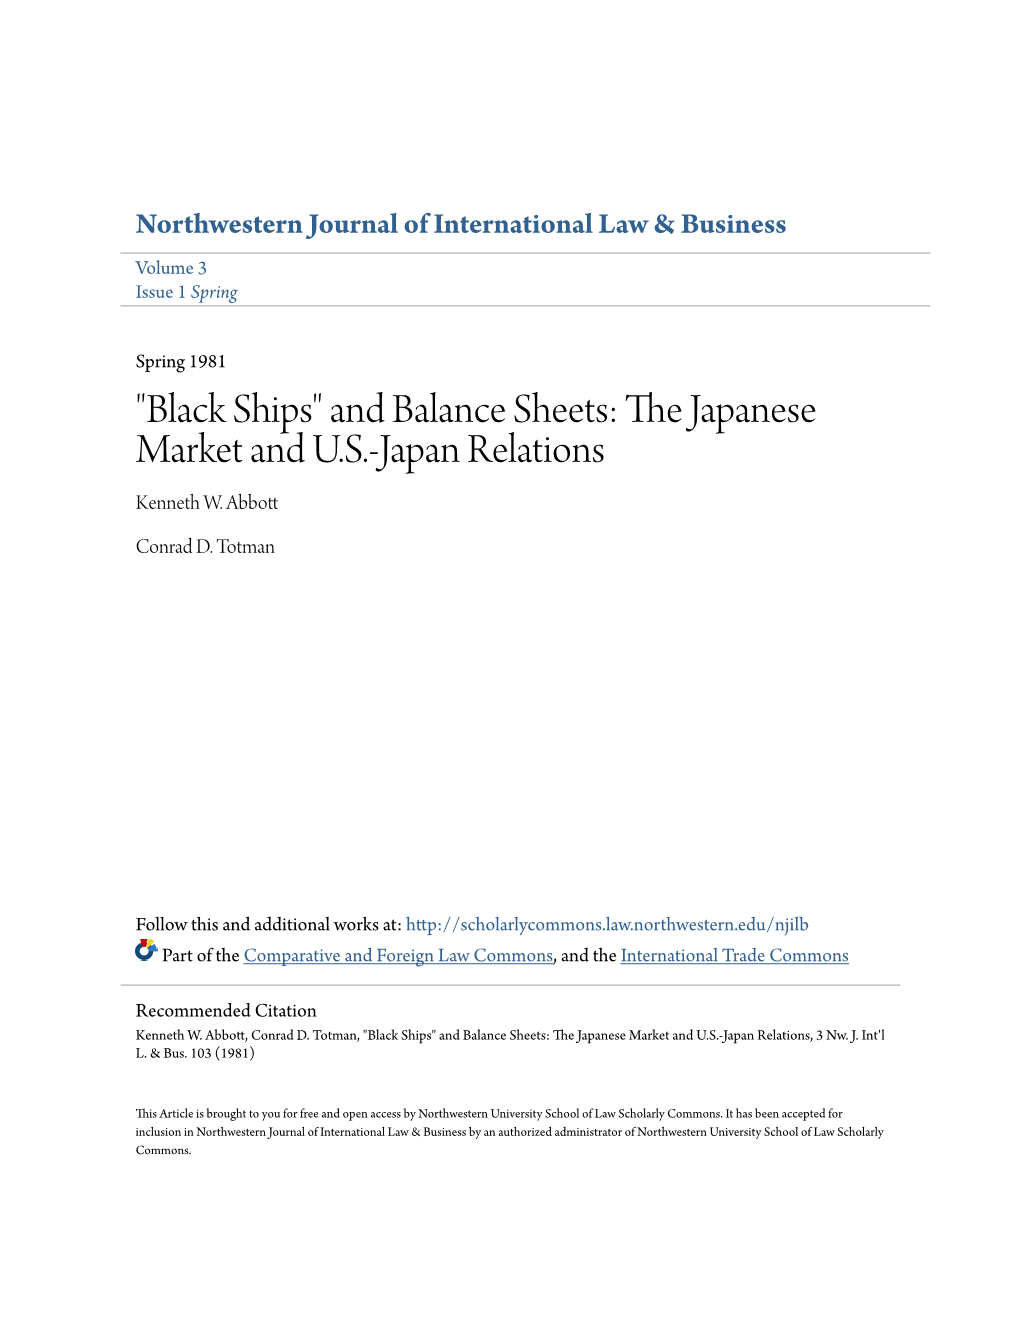 "Black Ships" and Balance Sheets: the Japanese Market and U.S.-Japan Relations